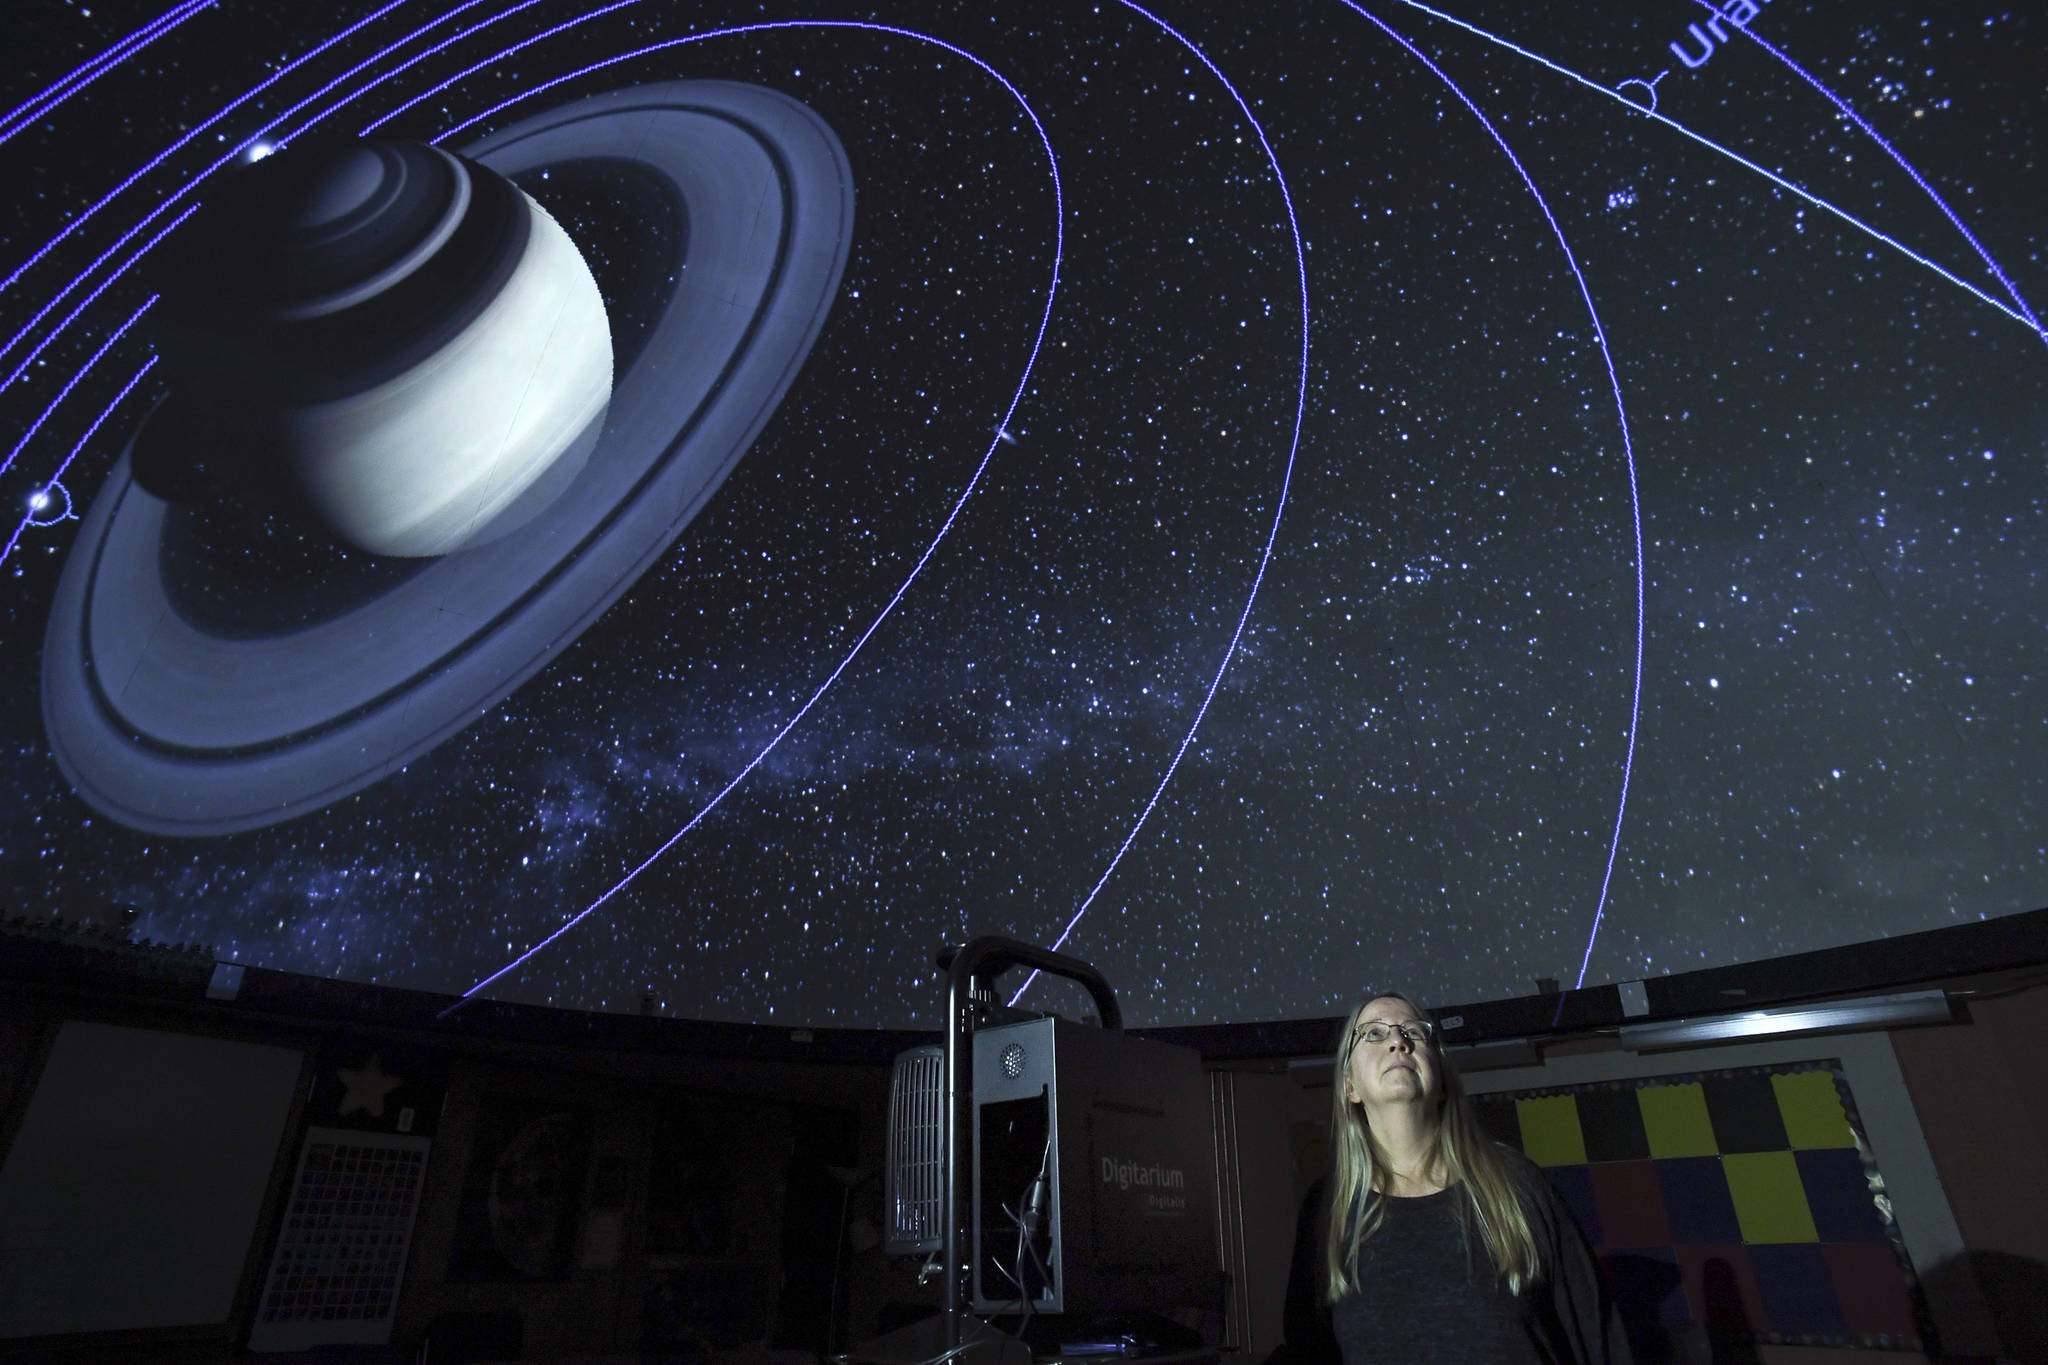 Rosemary Walling, a volunteer and board member of Friends of the Marie Drake Planetarium, views Saturn and its moons’ orbits as projected by a visiting digital projector from Seattle’s Museum of Flight in October 2019. The device is similar to the planetarium’s new projector. (Michael Penn | Juneau Empire)